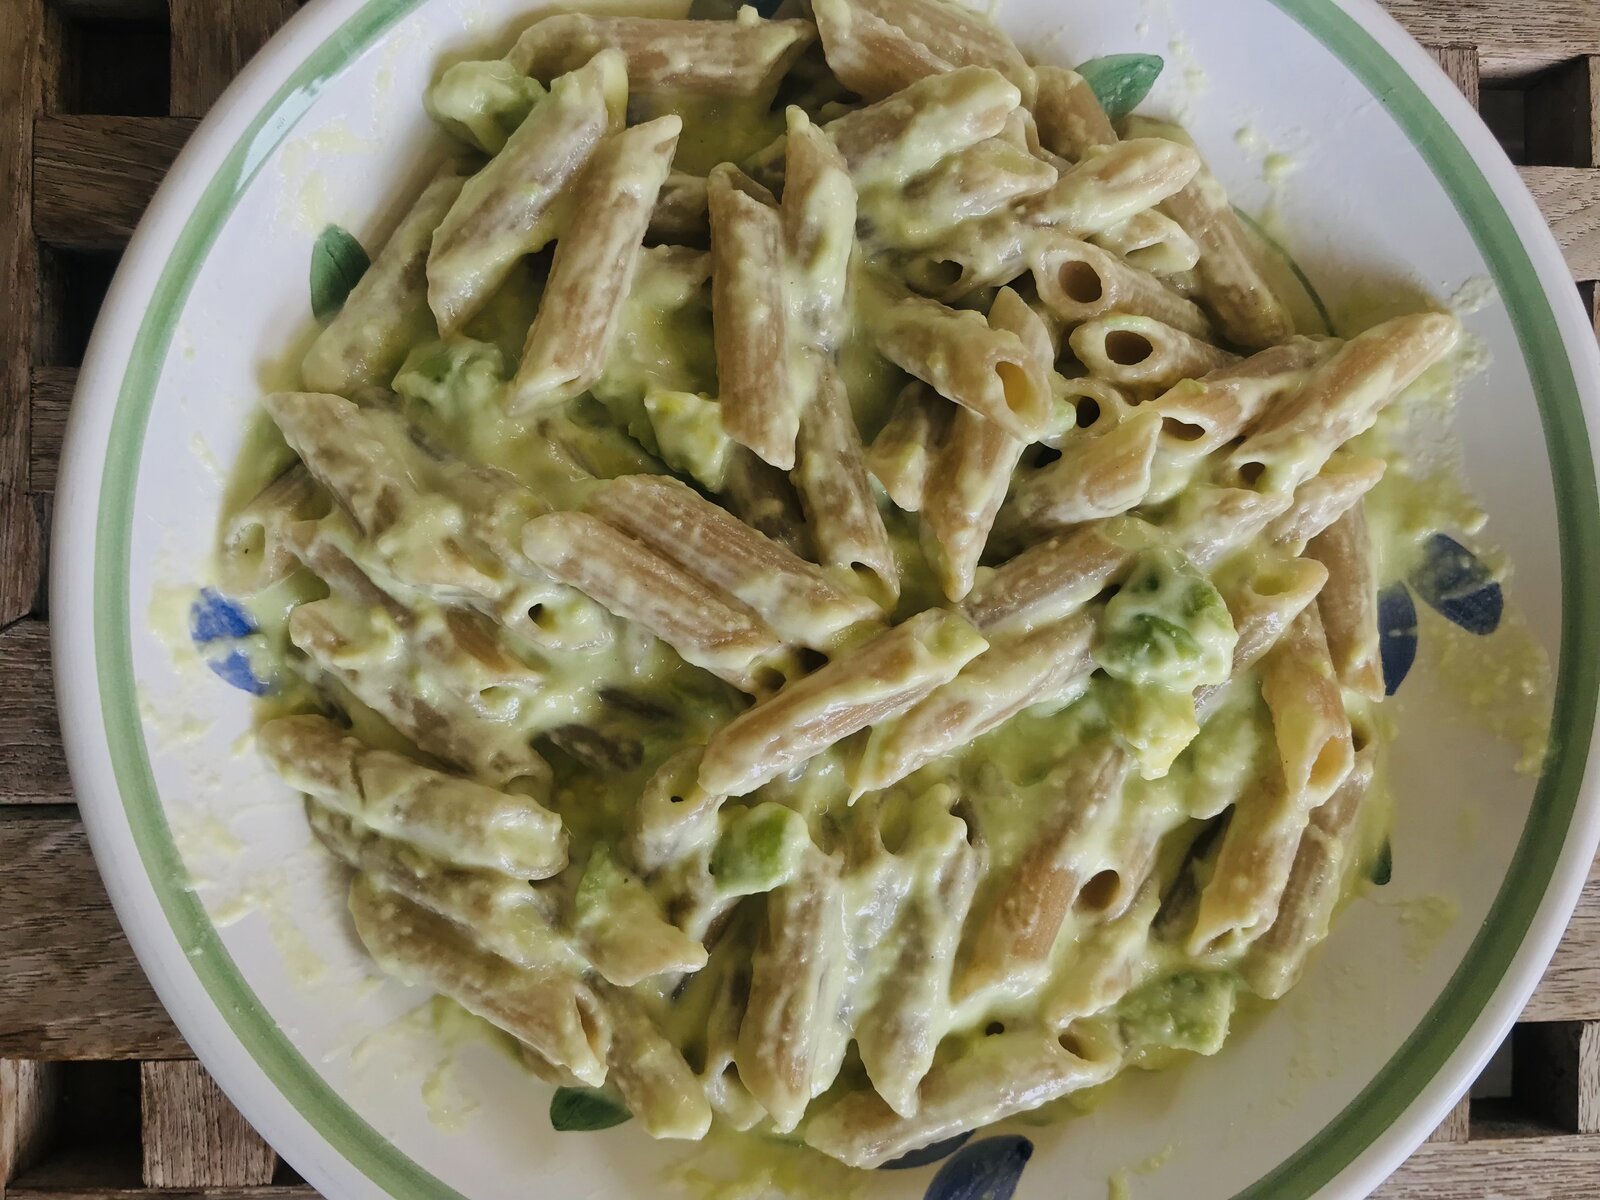 Oat penne with avocado and cheese.jpeg